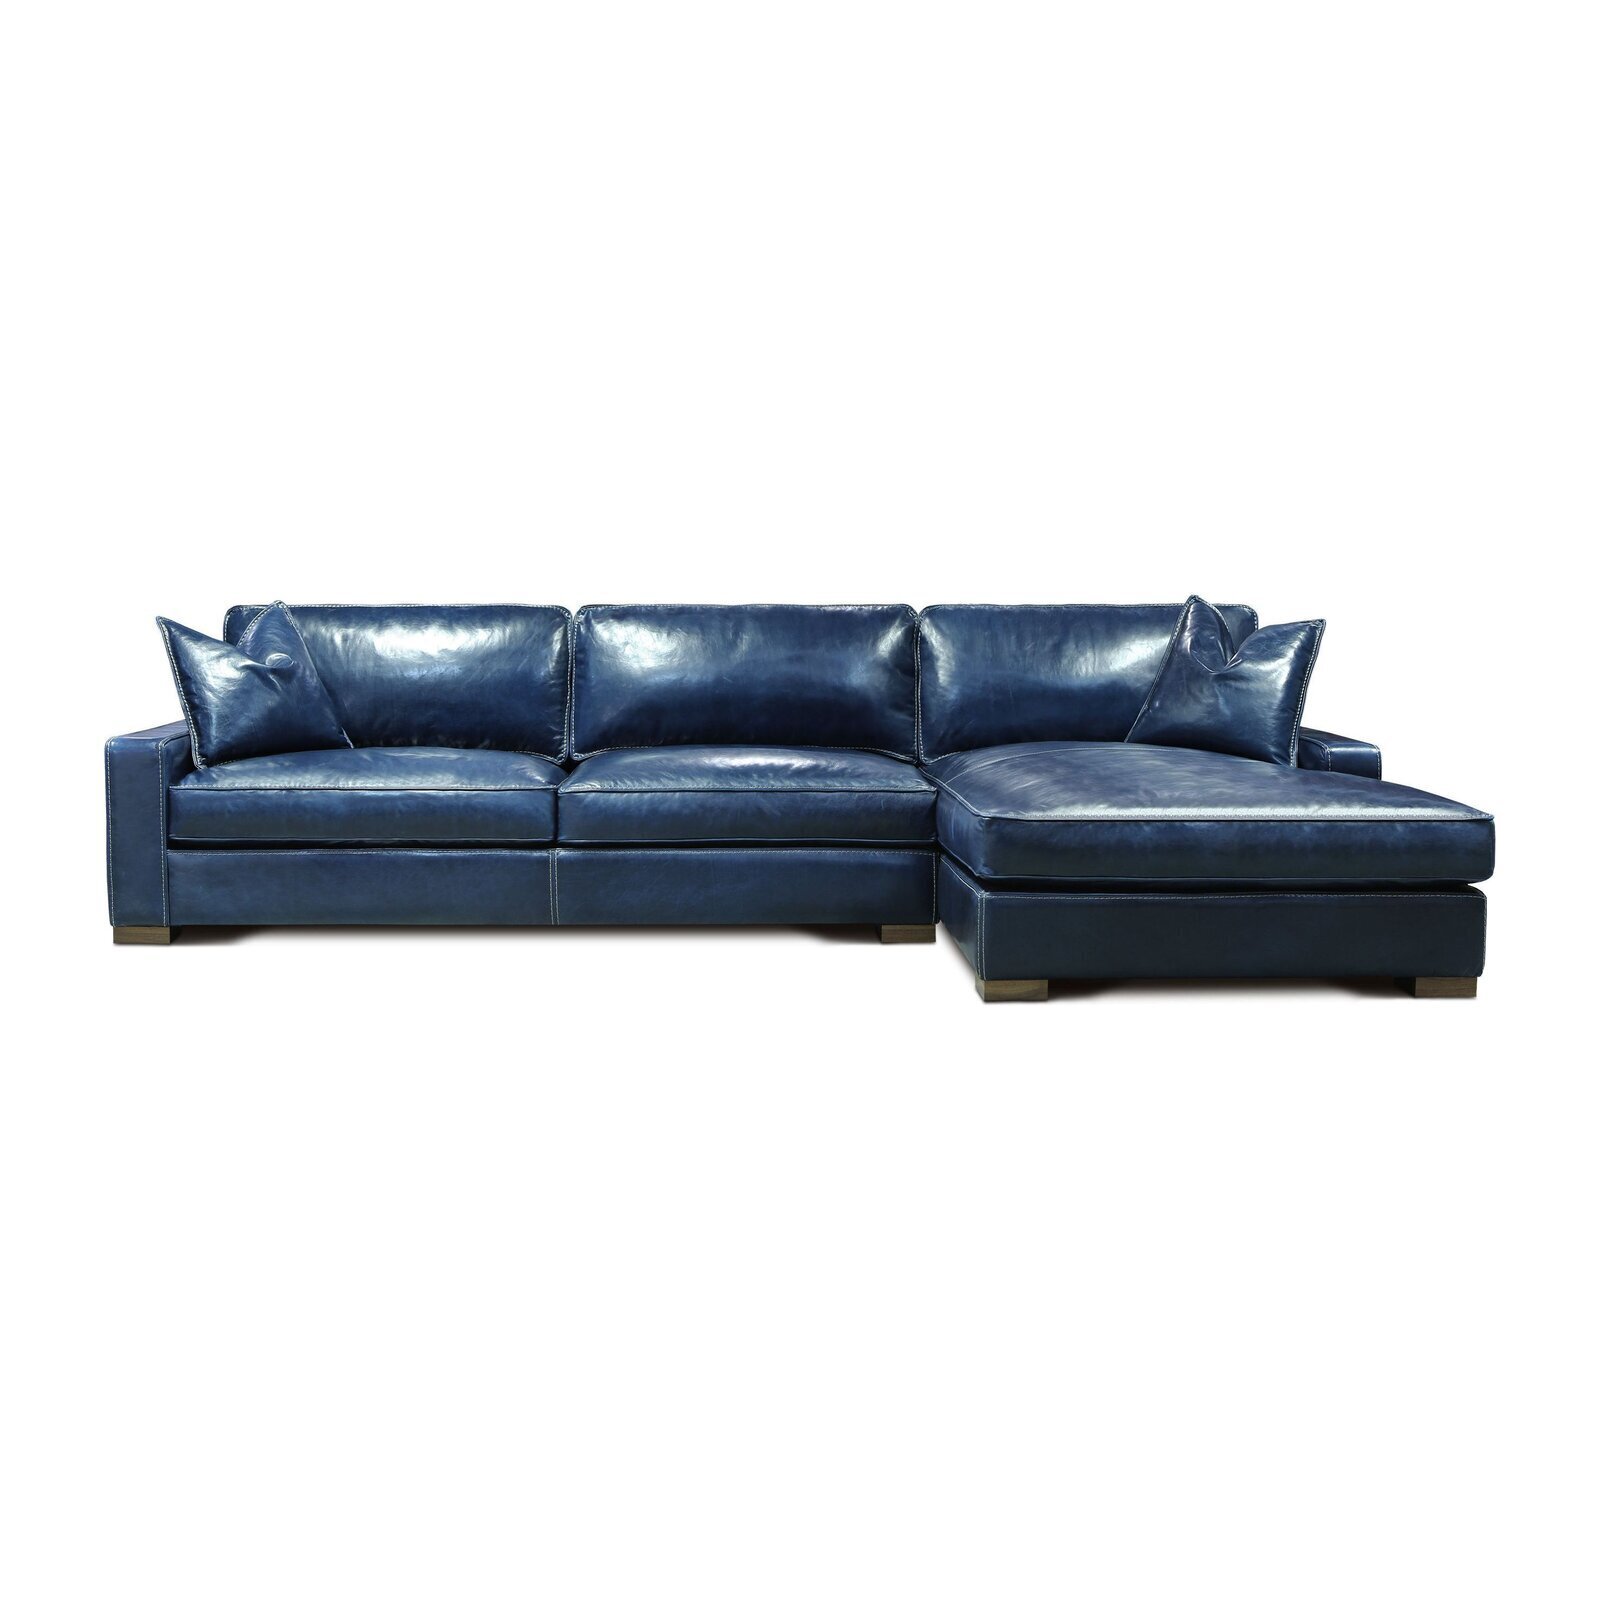 Top Grain Leather Sofa With Chaise Lounge